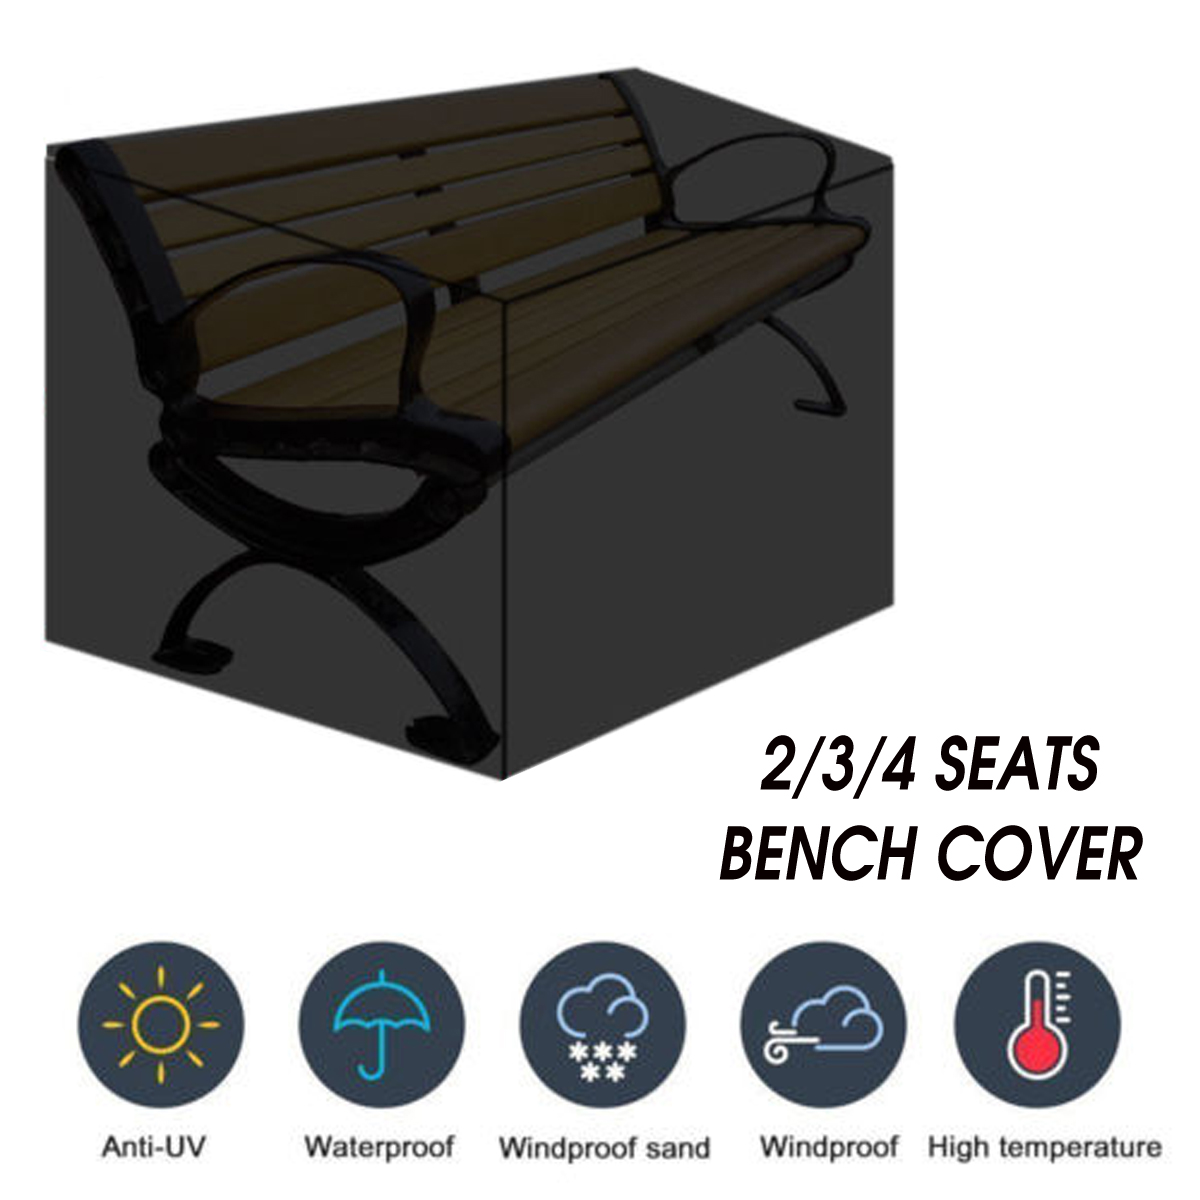 Waterproof-Furniture-Sofa-Bench-Table-Chair-Covers-234-Seaters-Garden-Outdoor-Patio-furniture-Cover-1446119-3